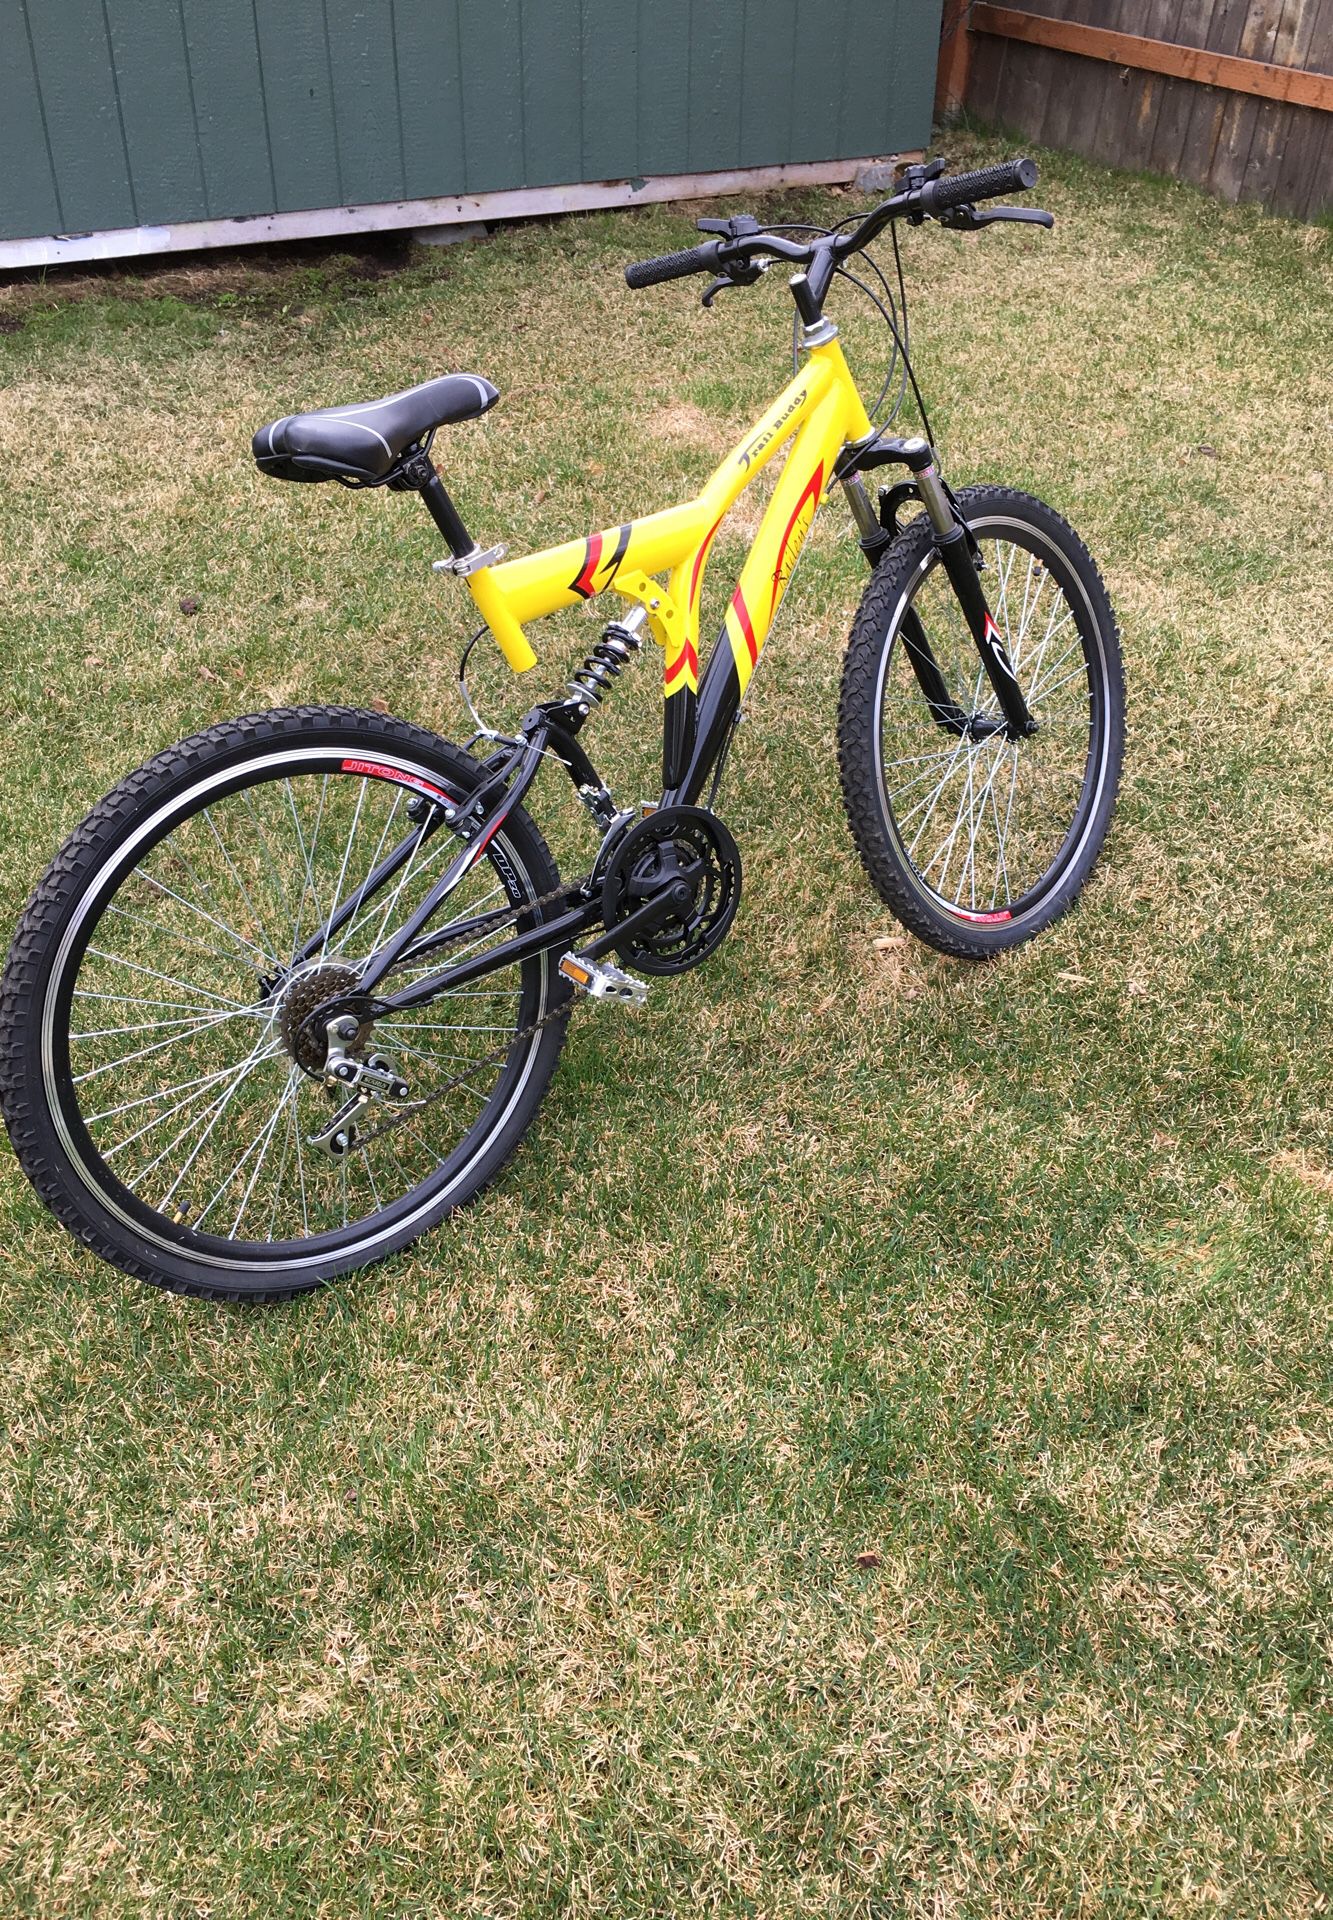 Brand new Trail Buddy. Mountain Bike. Never used. for Sale in